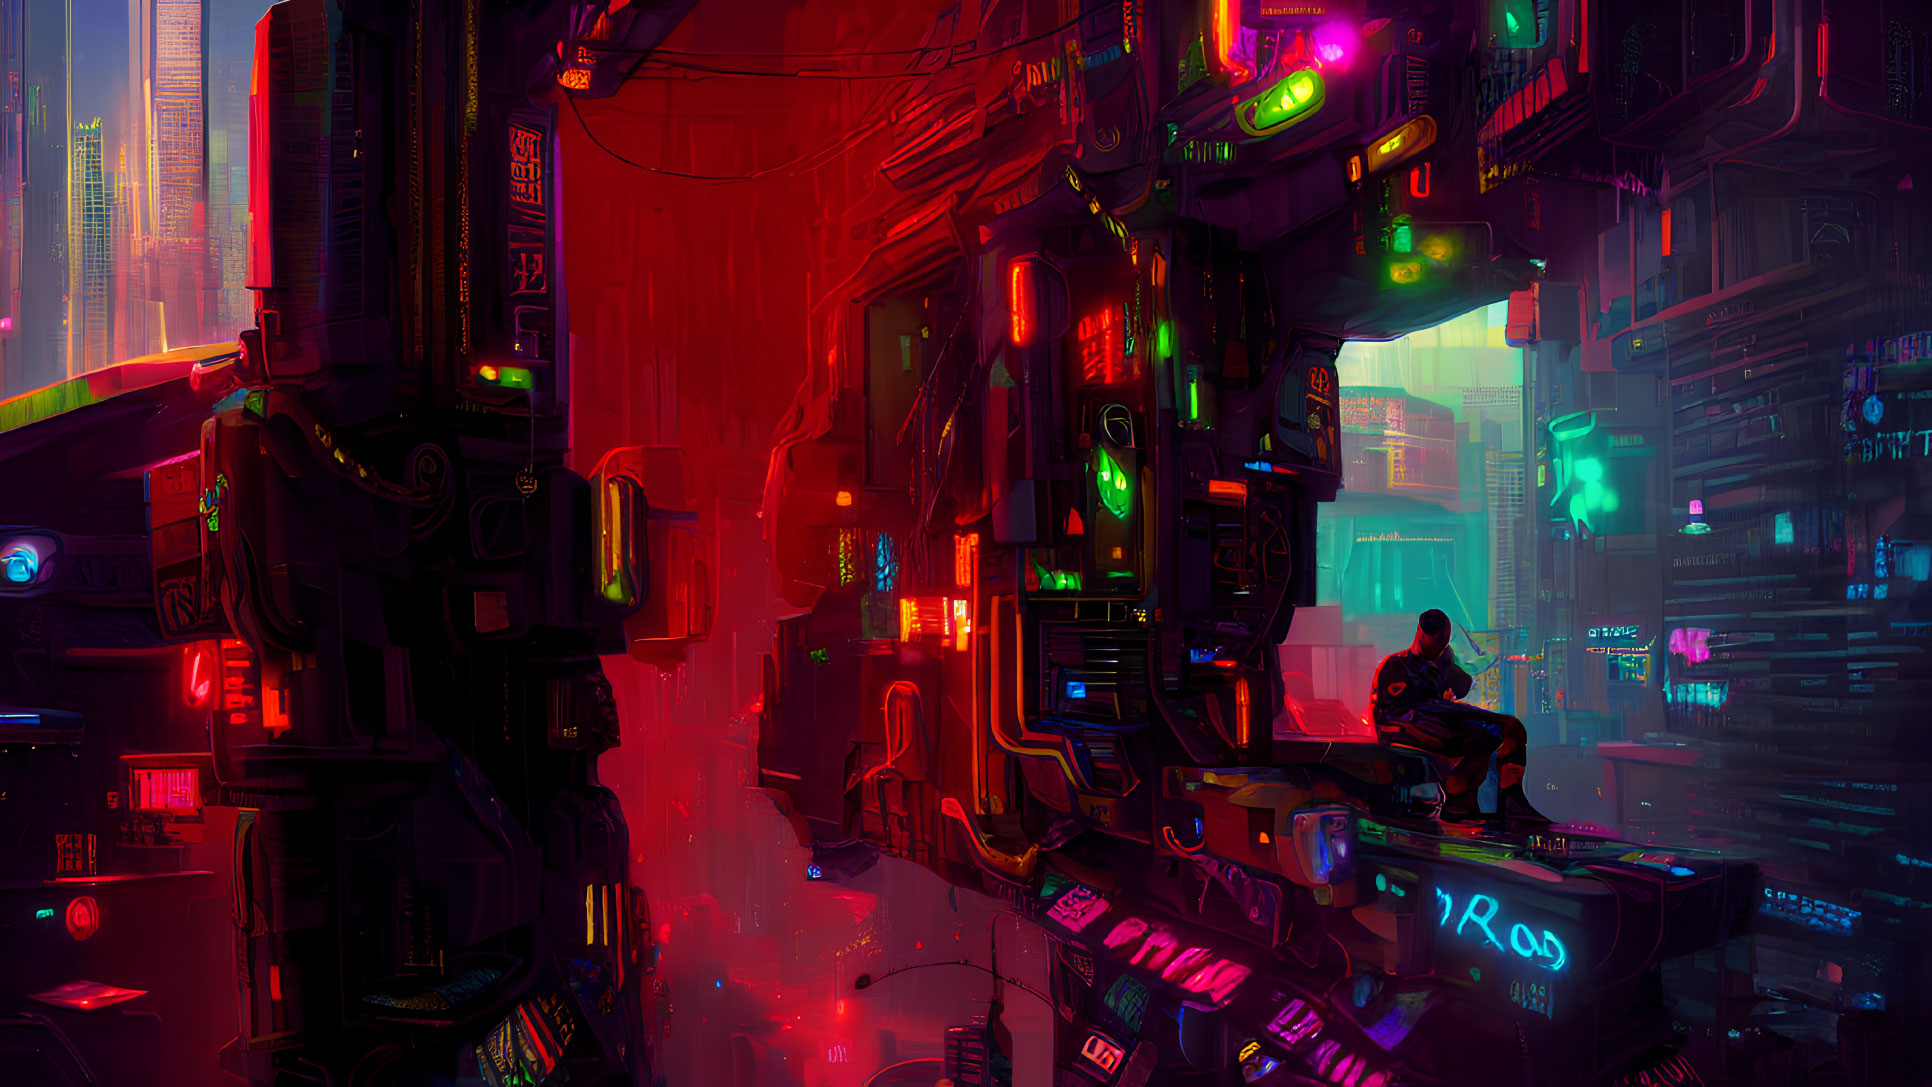 Nighttime cyberpunk cityscape with neon signs, lone figure, and futuristic buildings